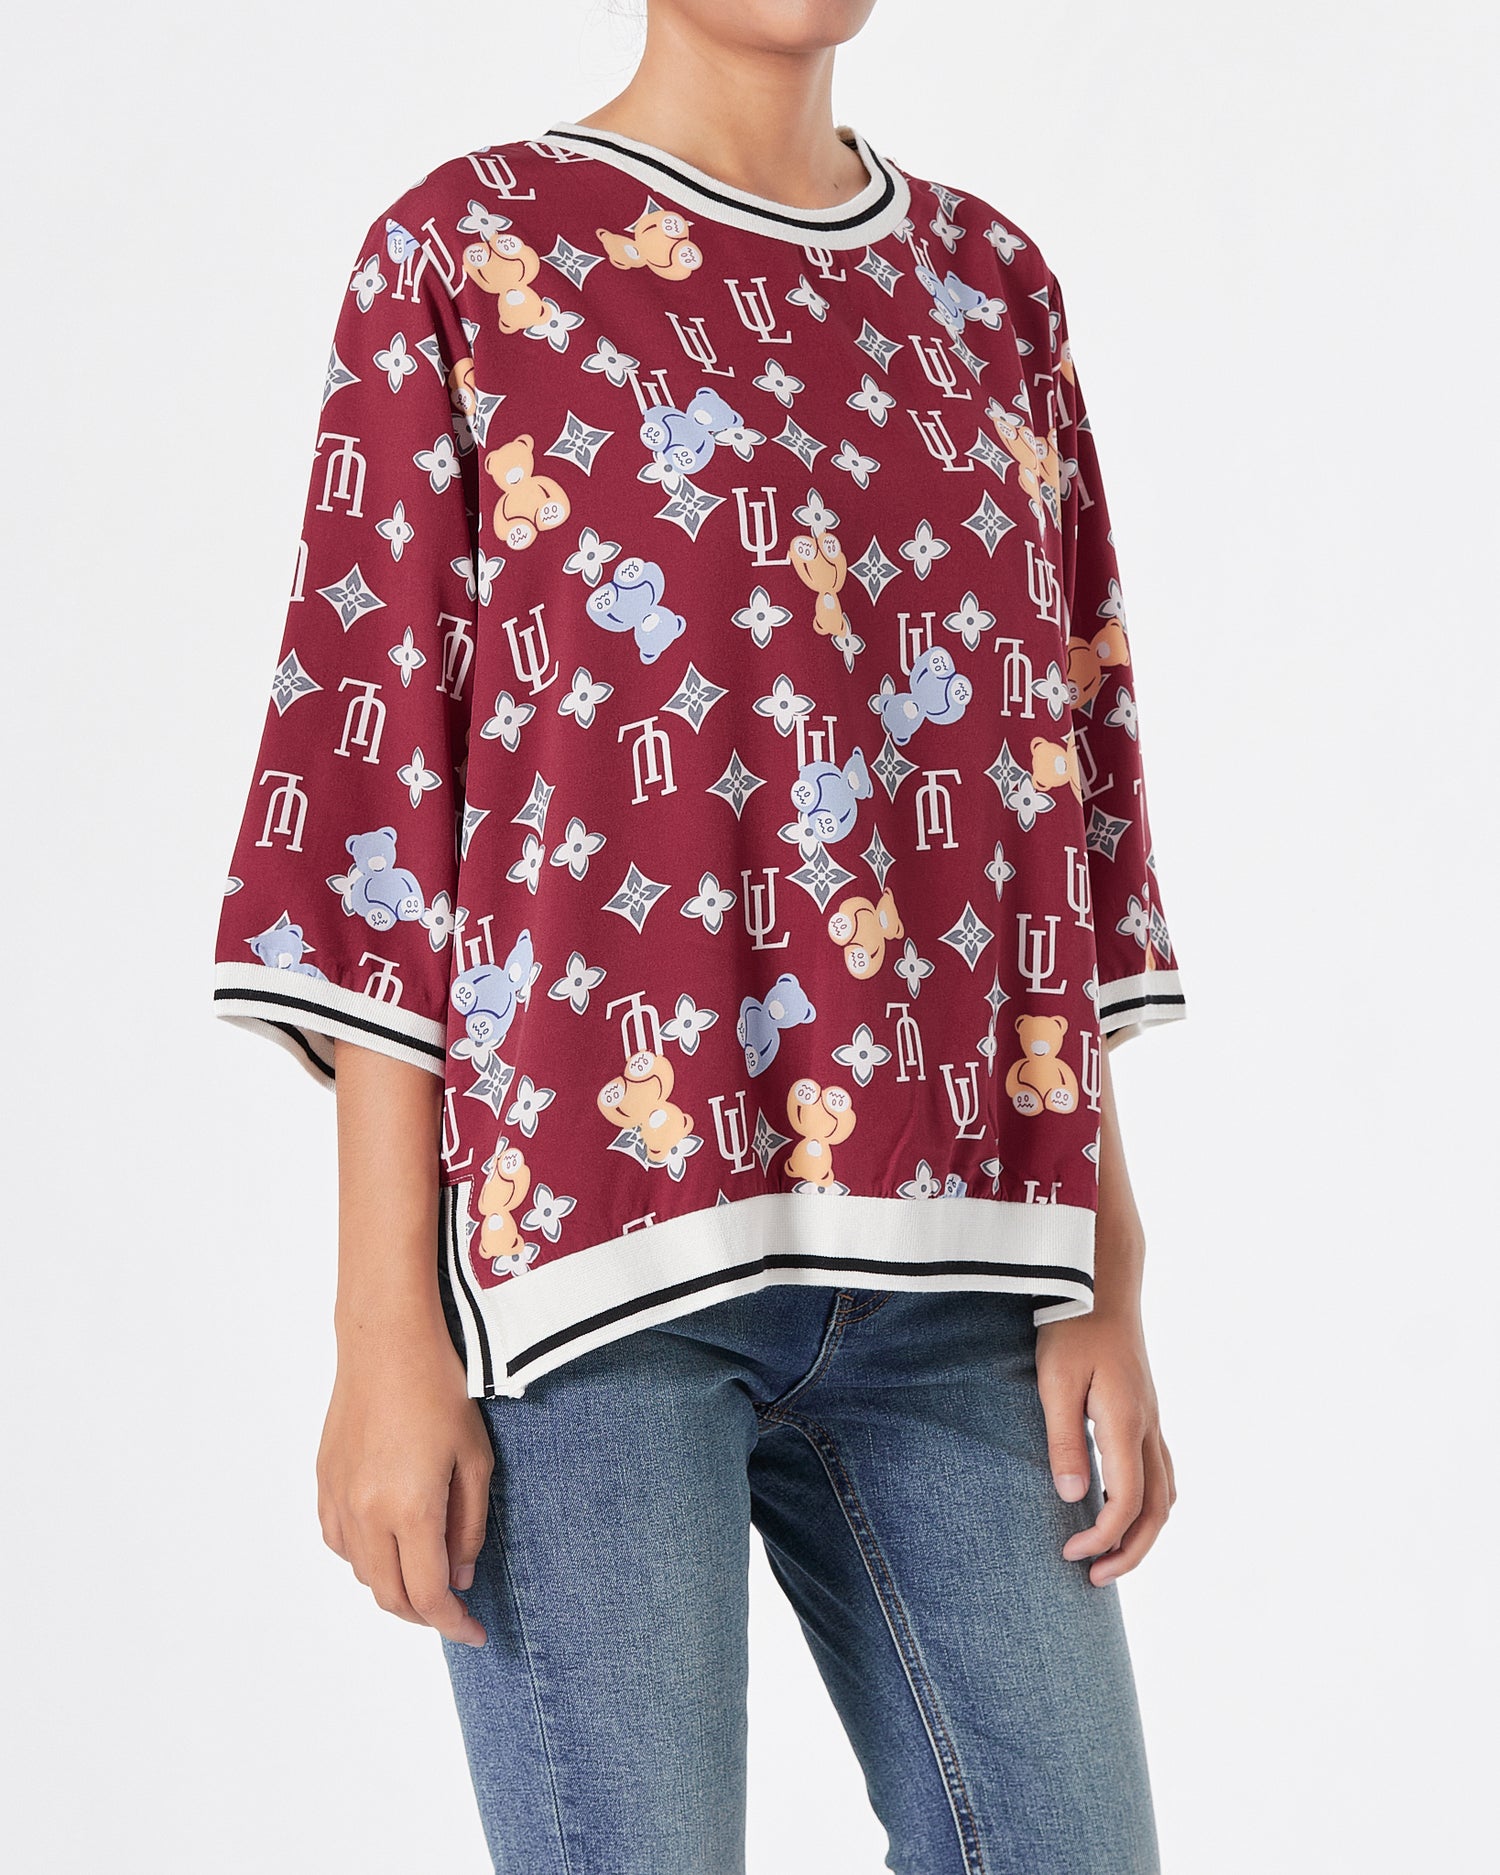 Monogram Over Printed Lady Red T-Shirt 15.90